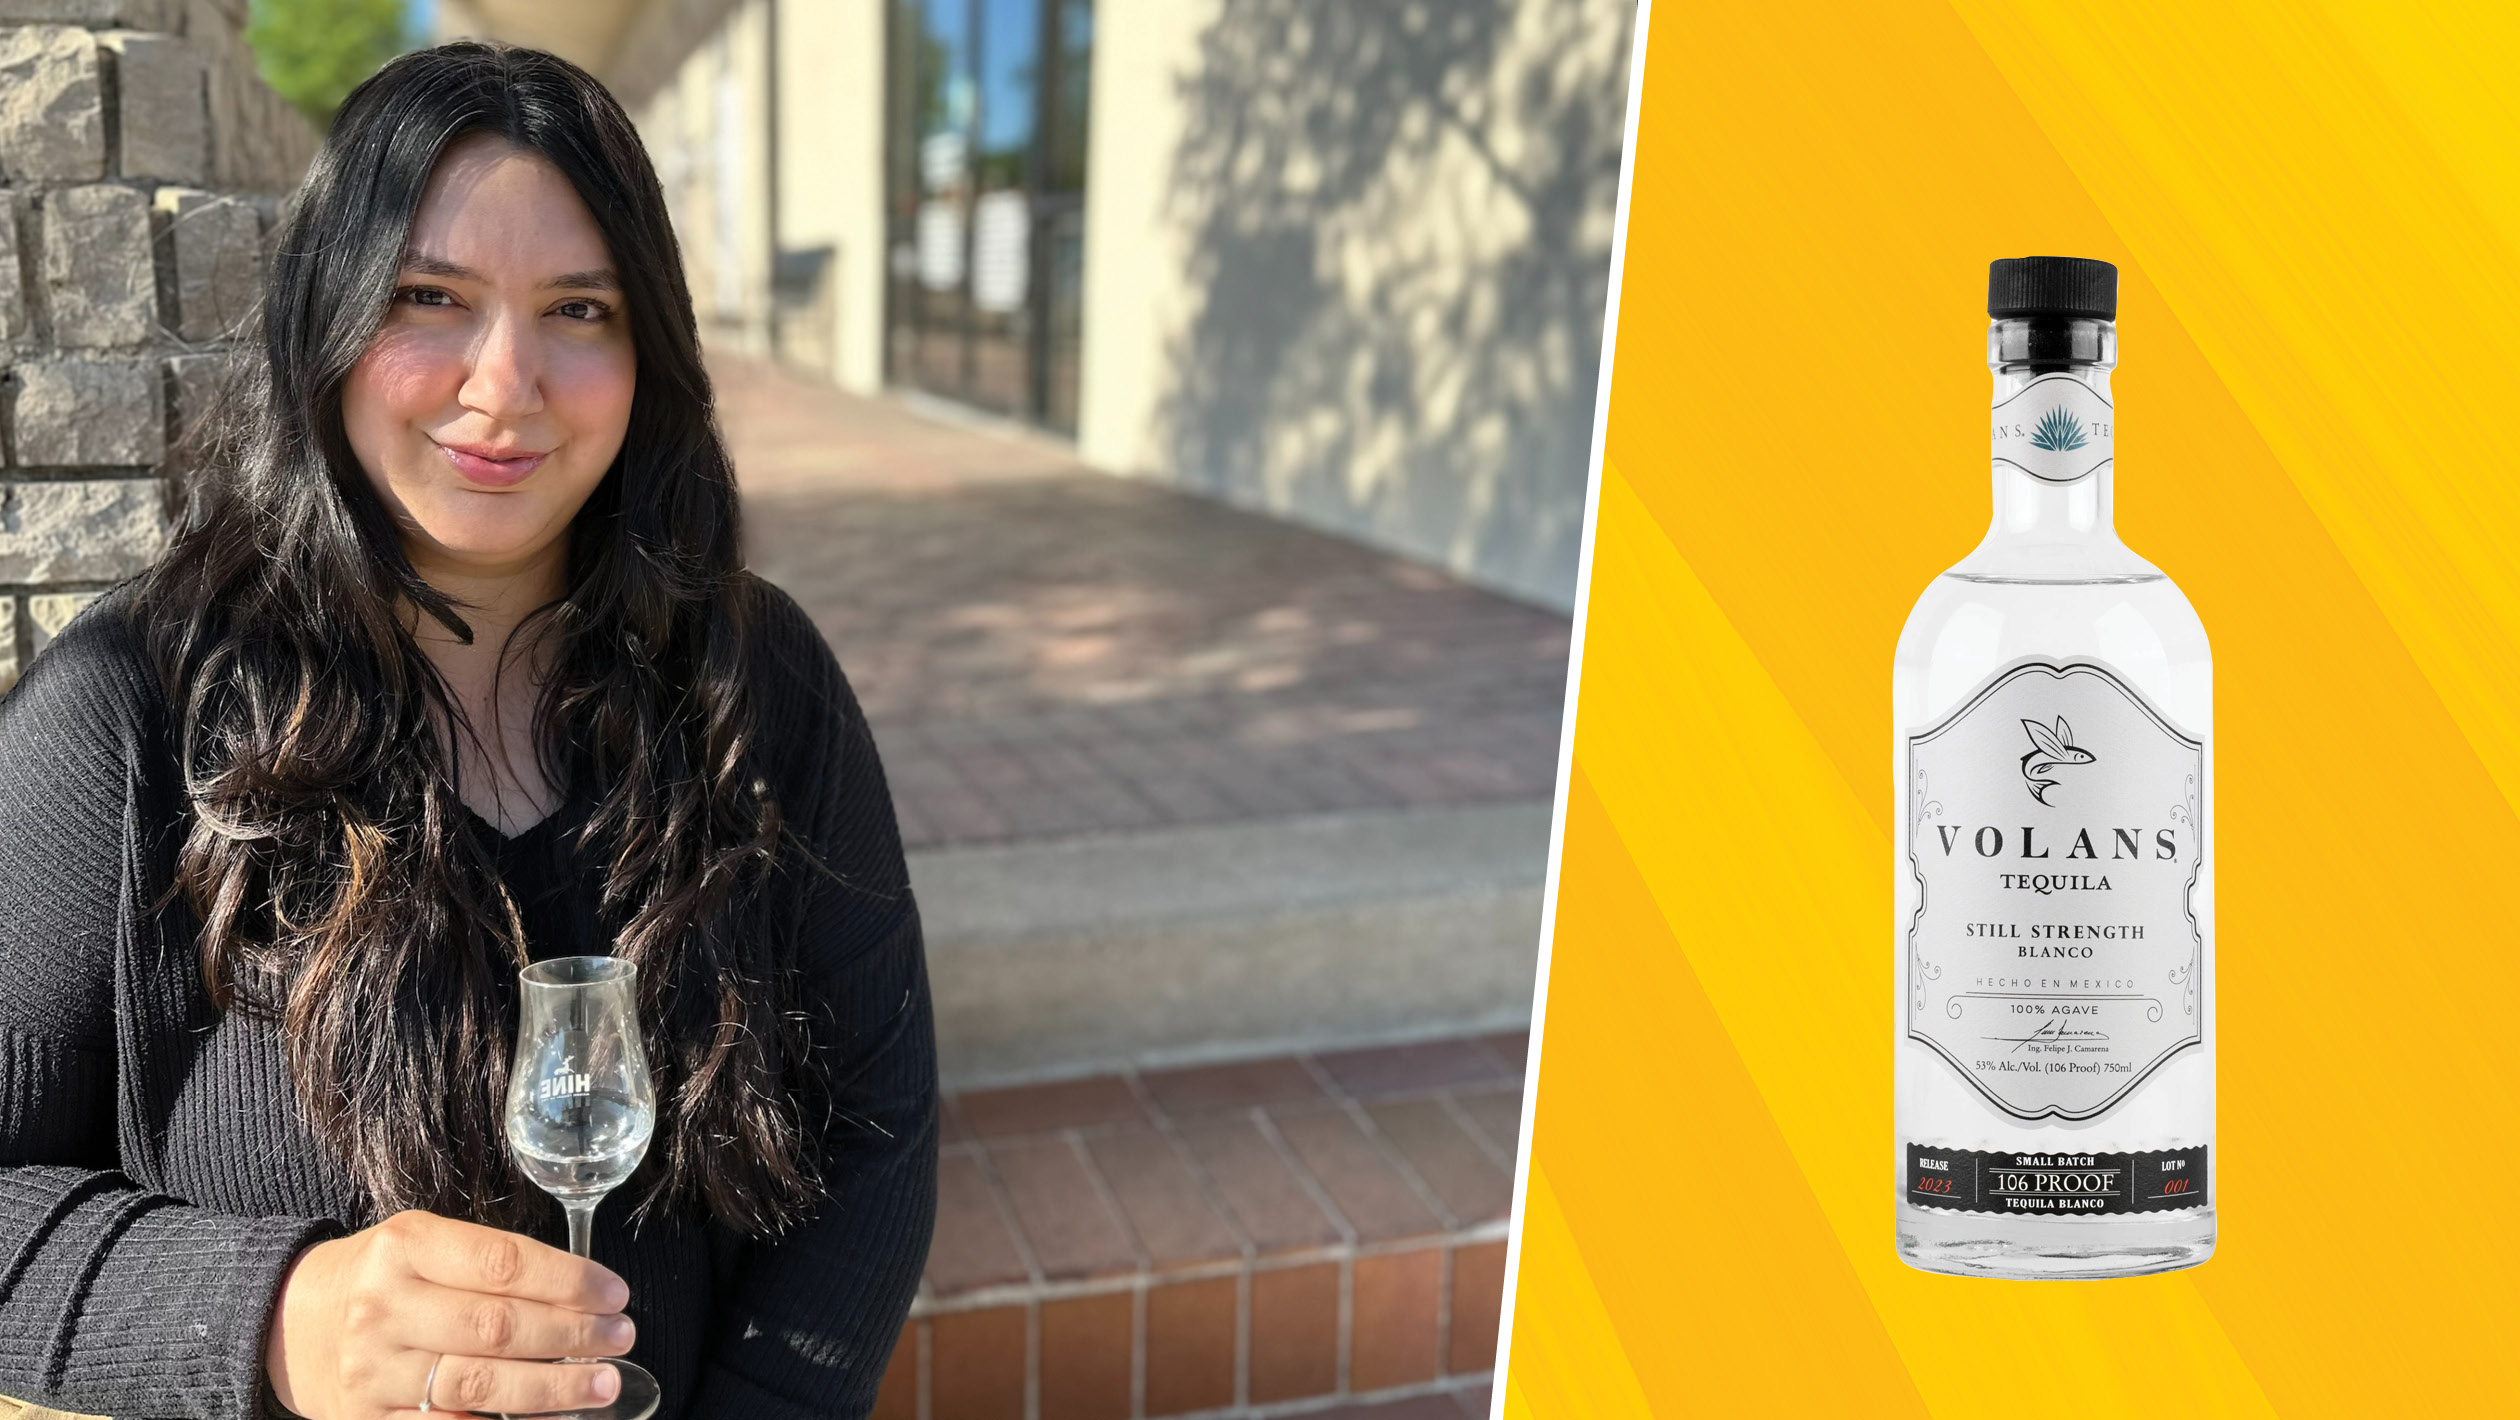 From left to right: Victoria Garcia, the spirits specialist of Pogo’s Wine & Spirits; Volans Still Strength Blanco. Photo credit: Victoria Garcia.